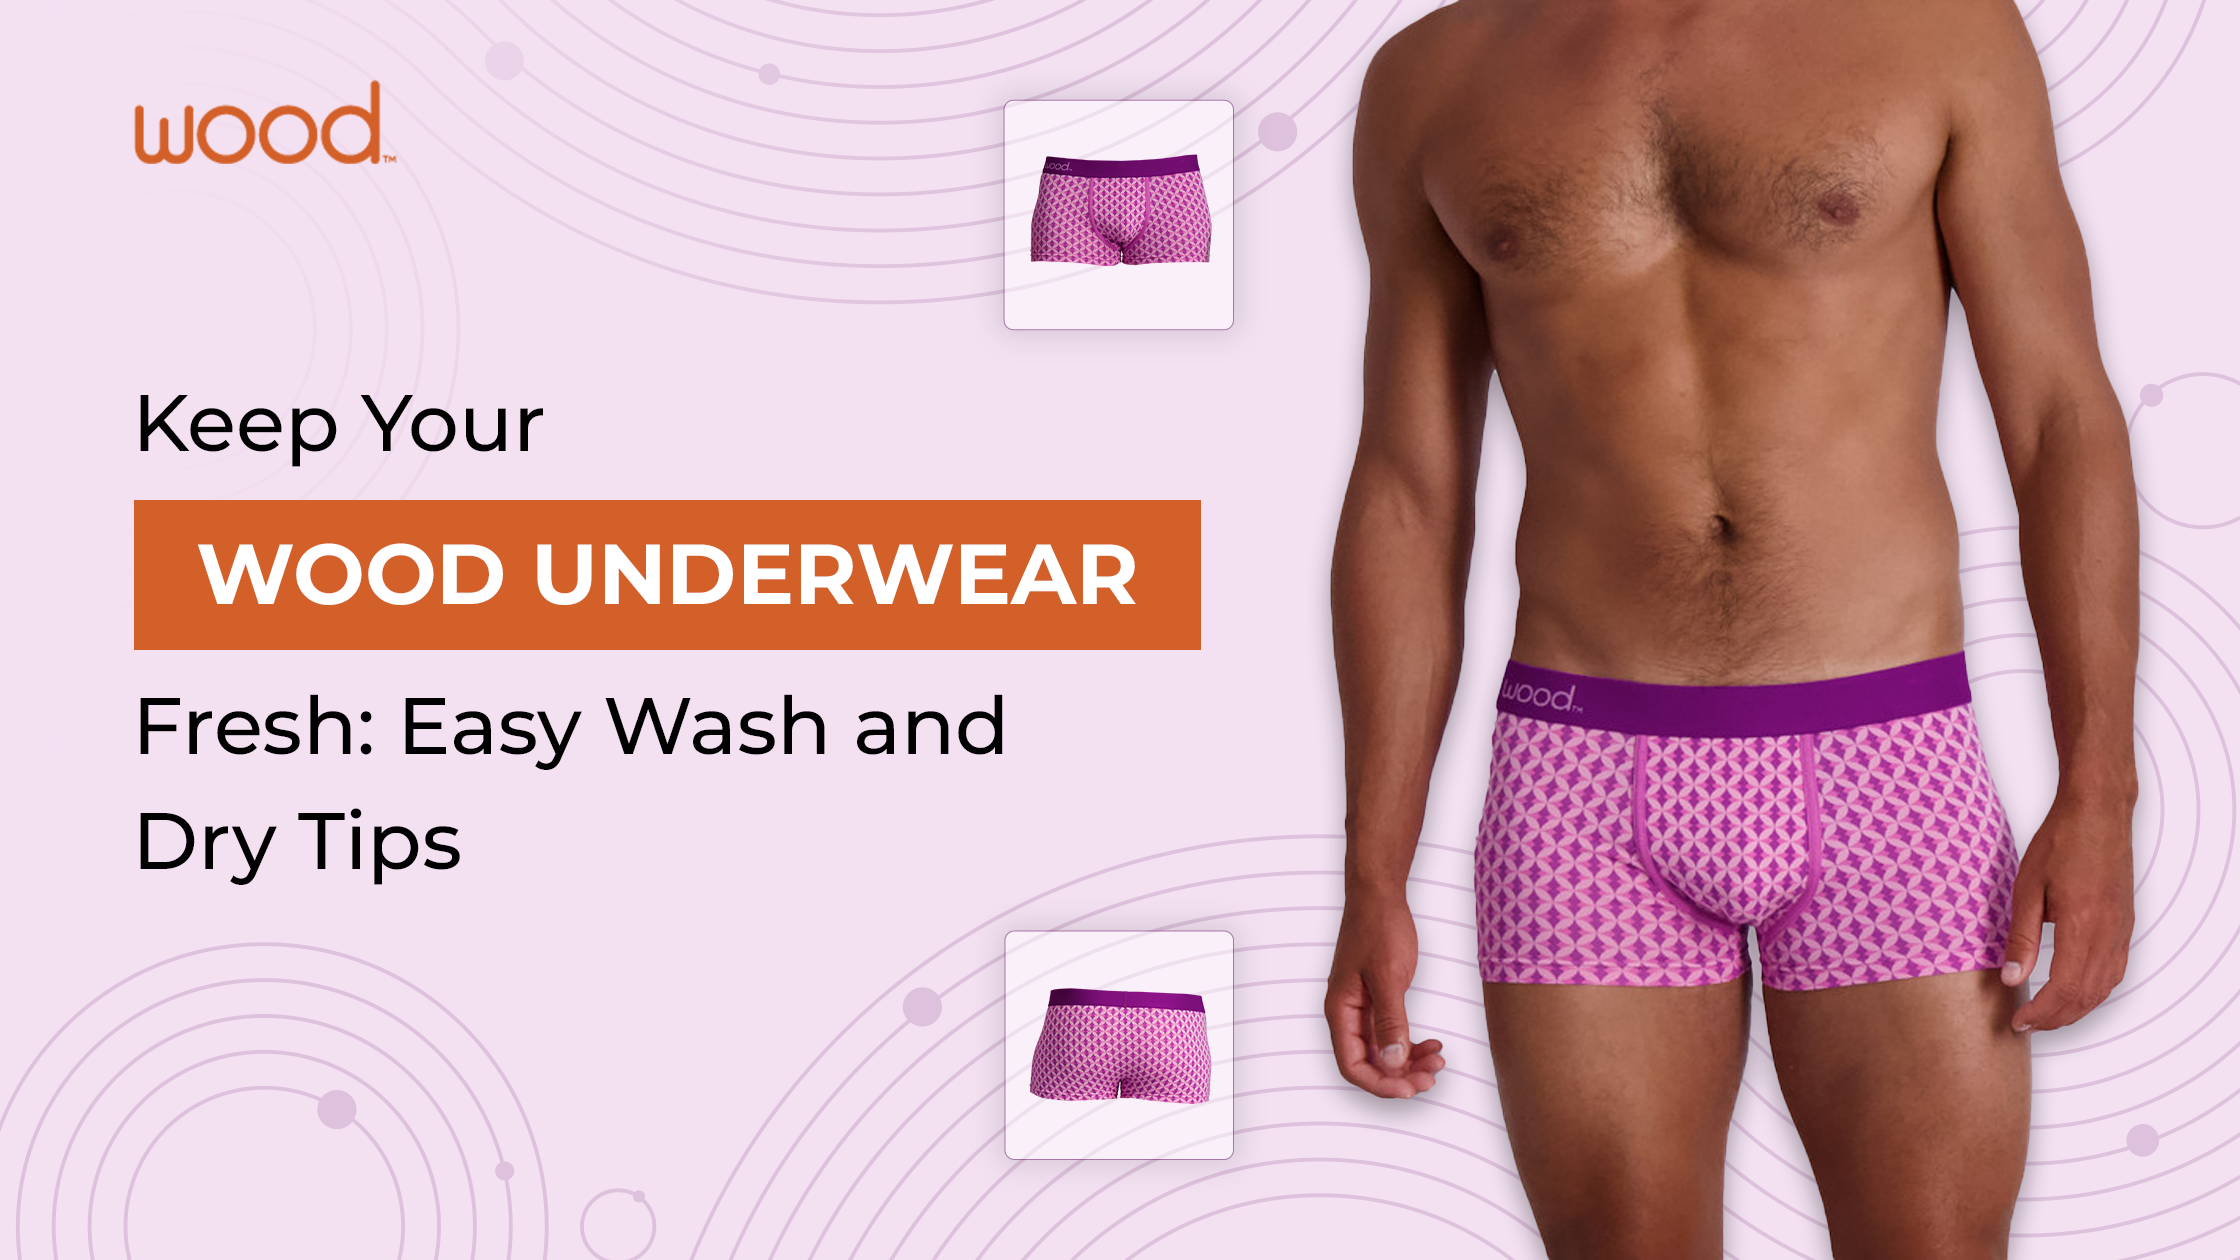 How to Care for Your Wood Underwear